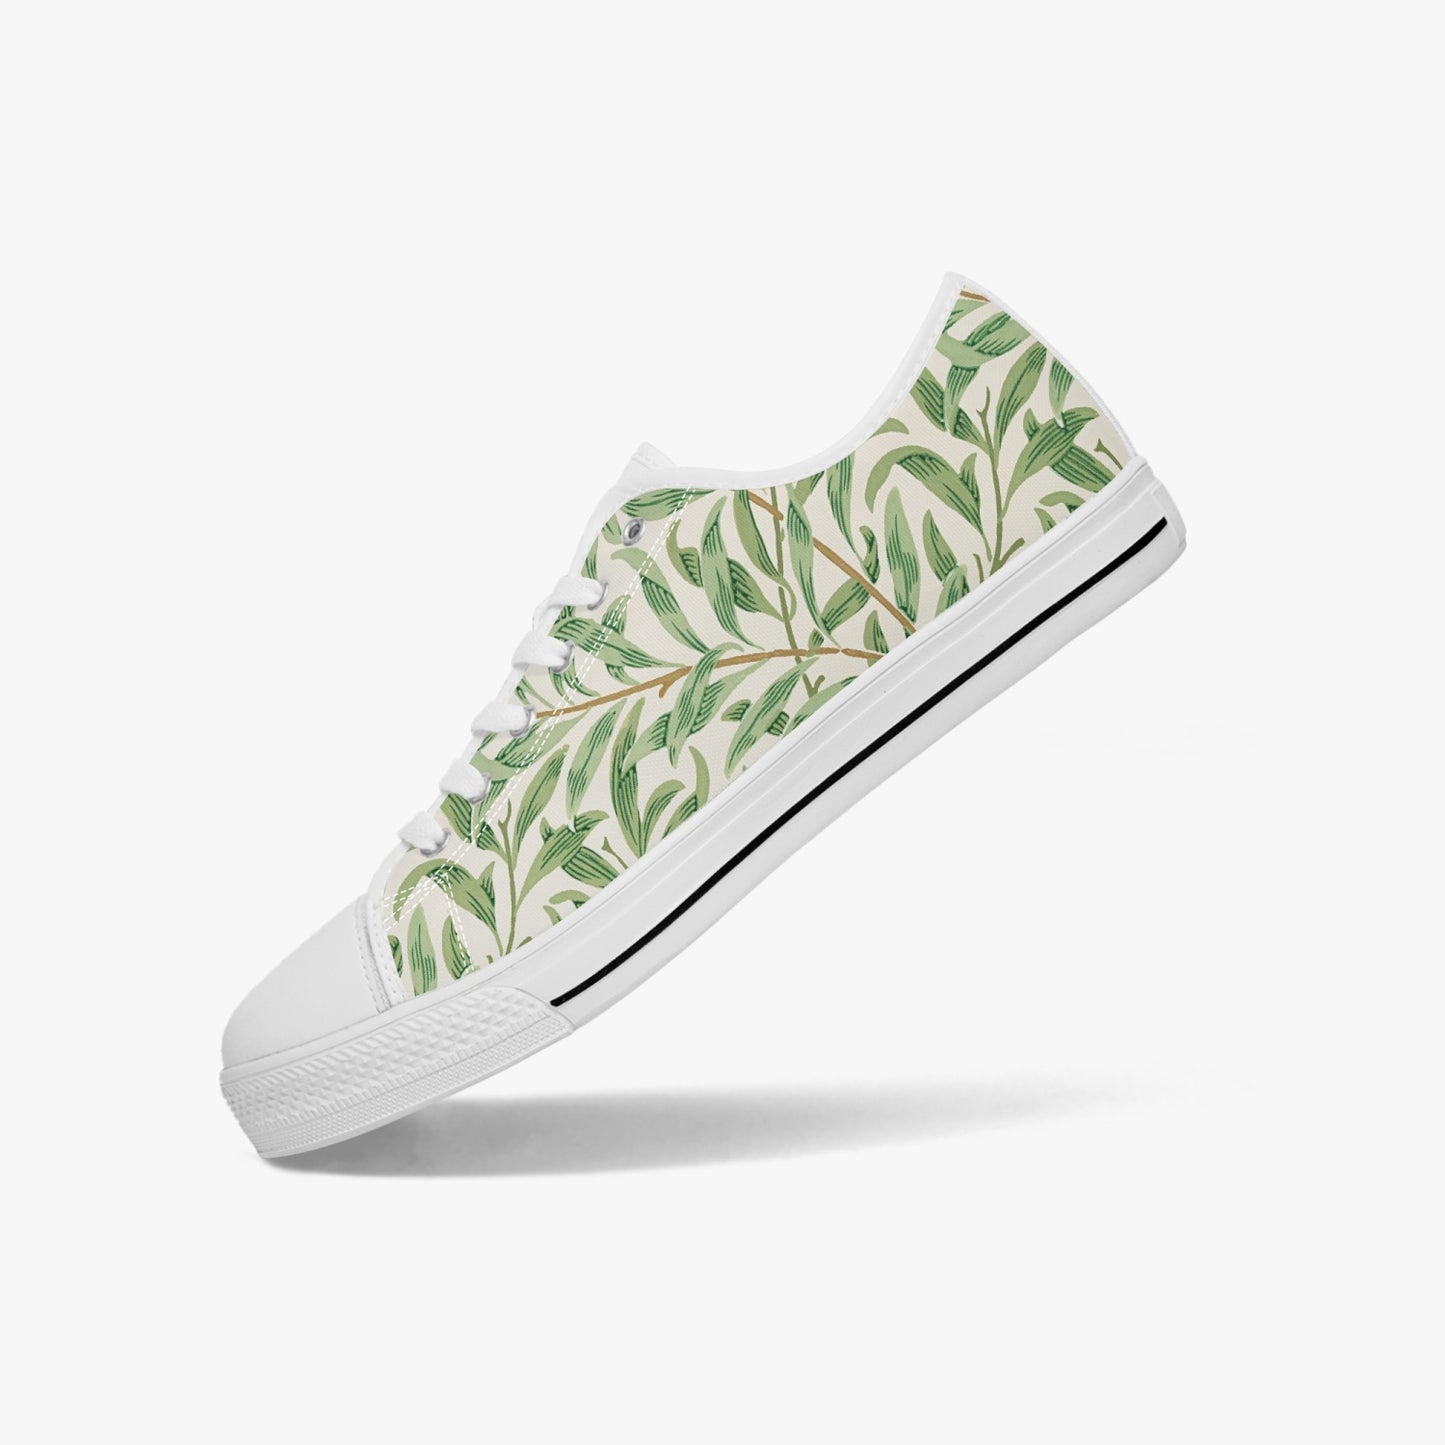 Flowered Sneakers: Canvas Low-Tops with Willow Bough William Morris Wallpaper Design